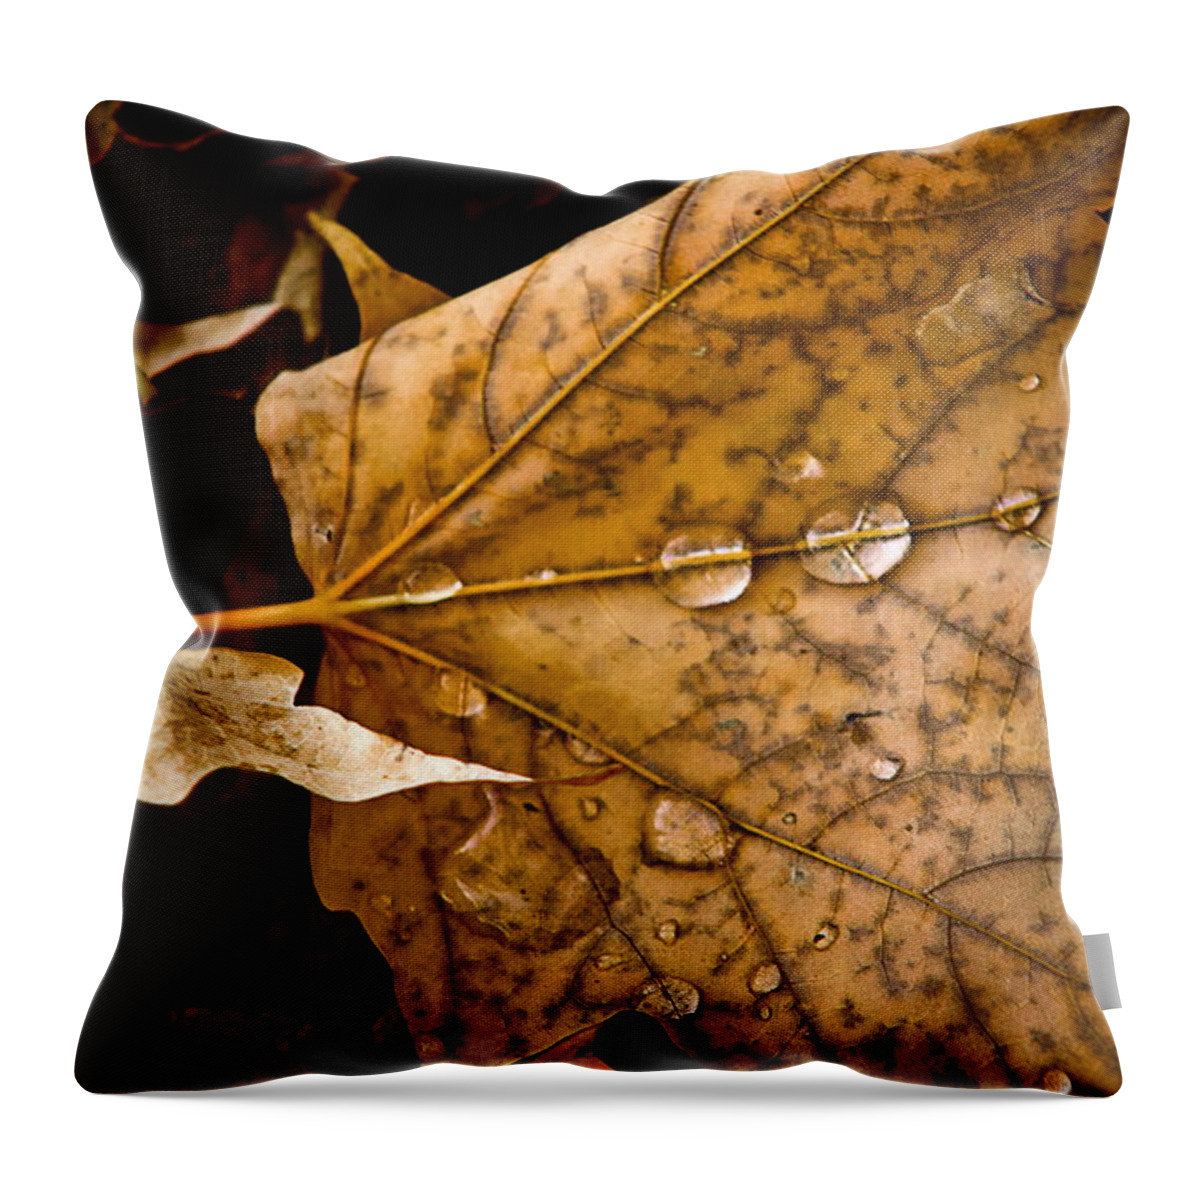 Water On Leaf Throw Pillow featuring the photograph Leaf And Water by Burney Lieberman